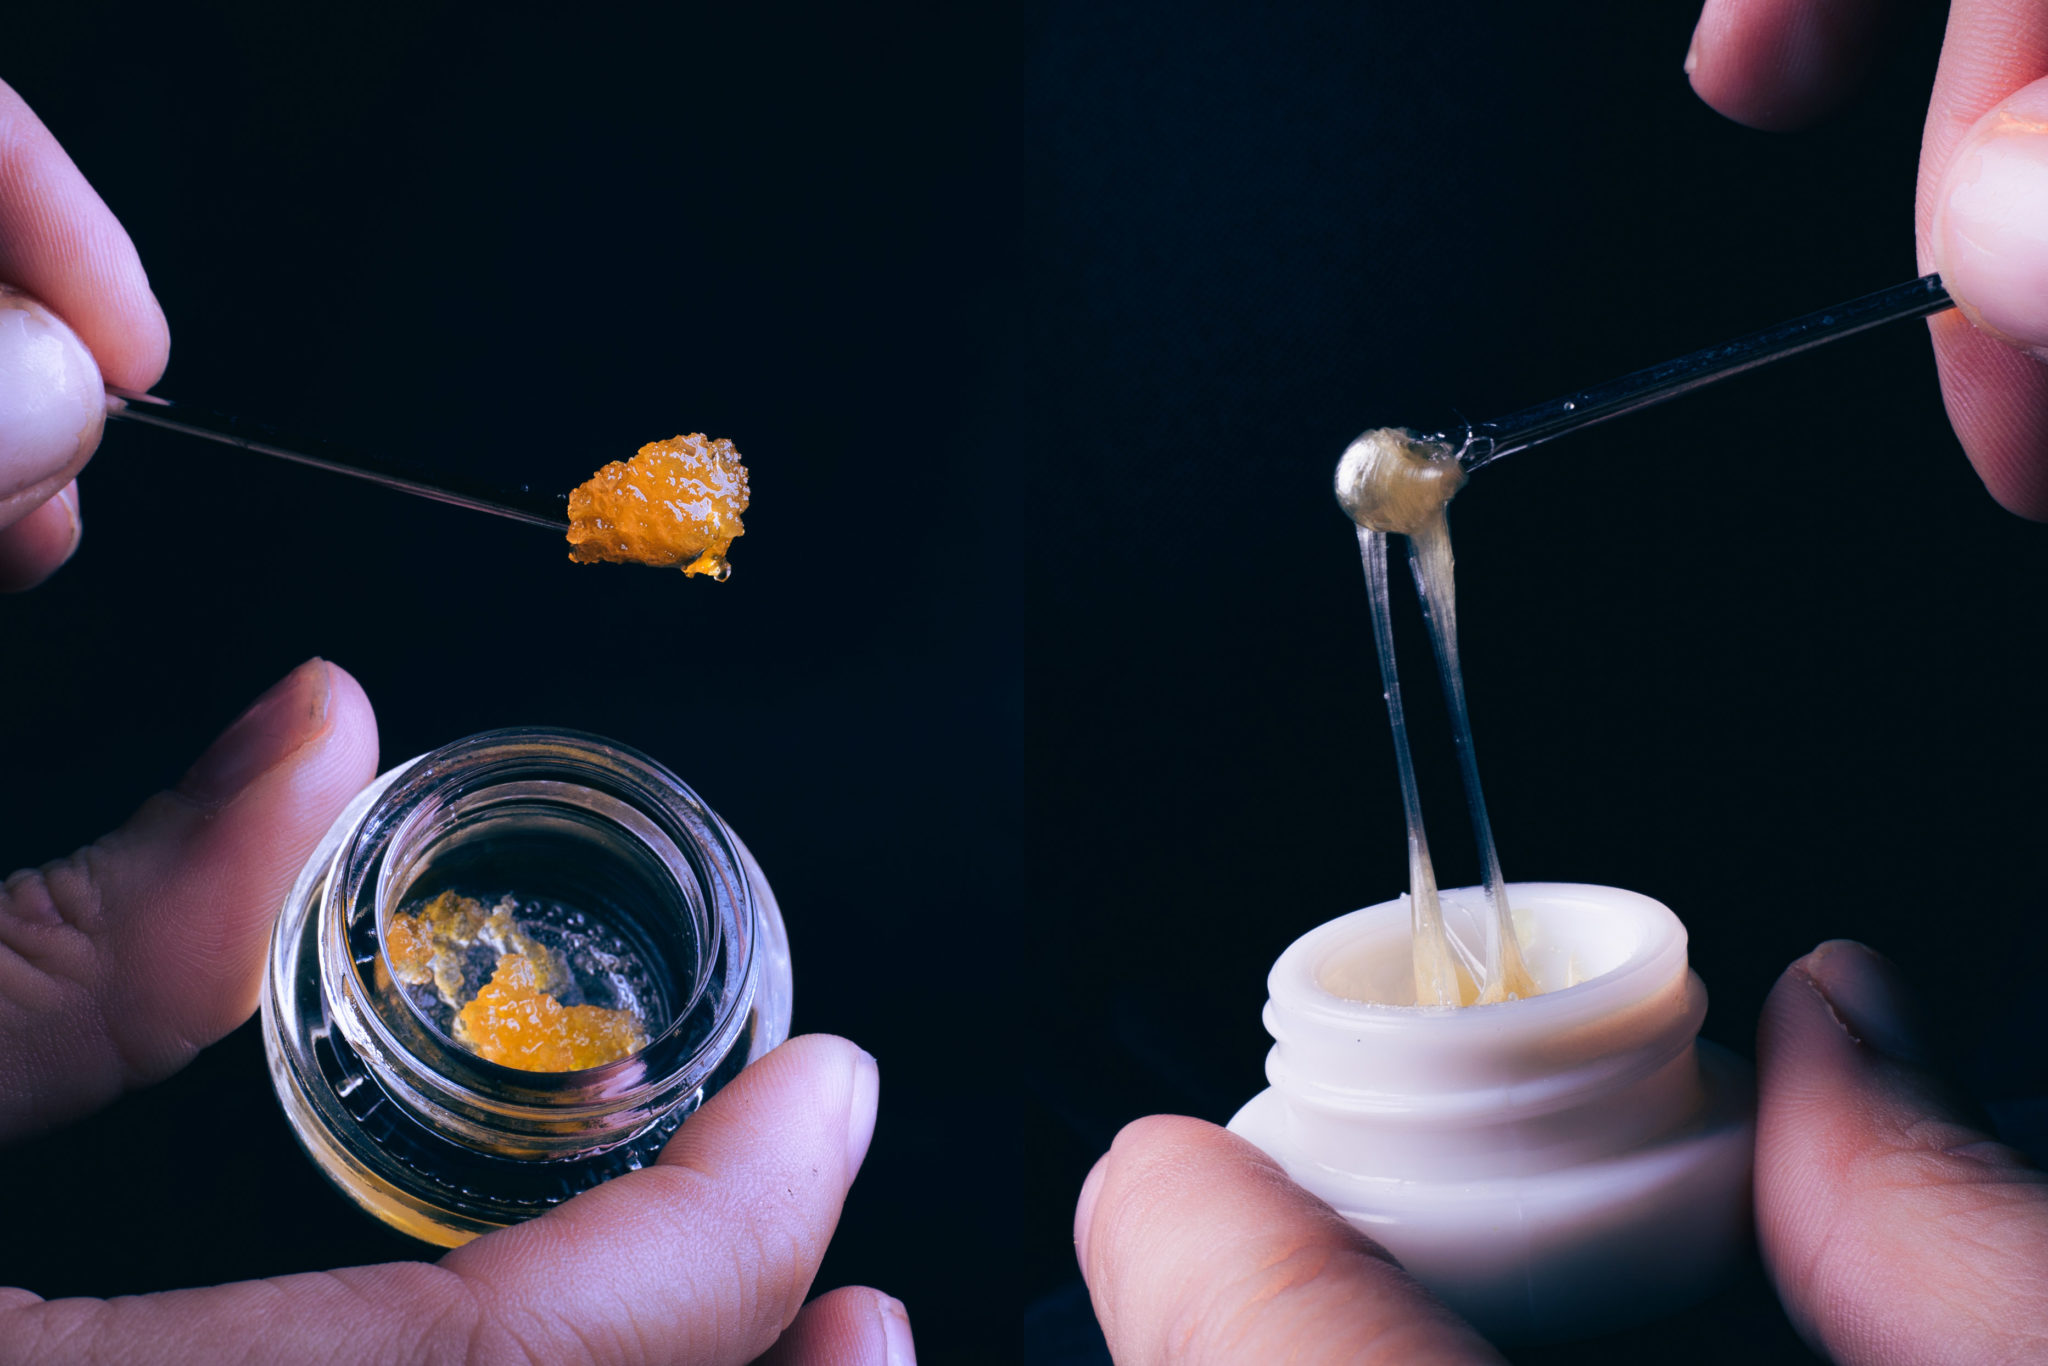 Showing Different types of dabs or cannabis concentrates to explain what are dabs